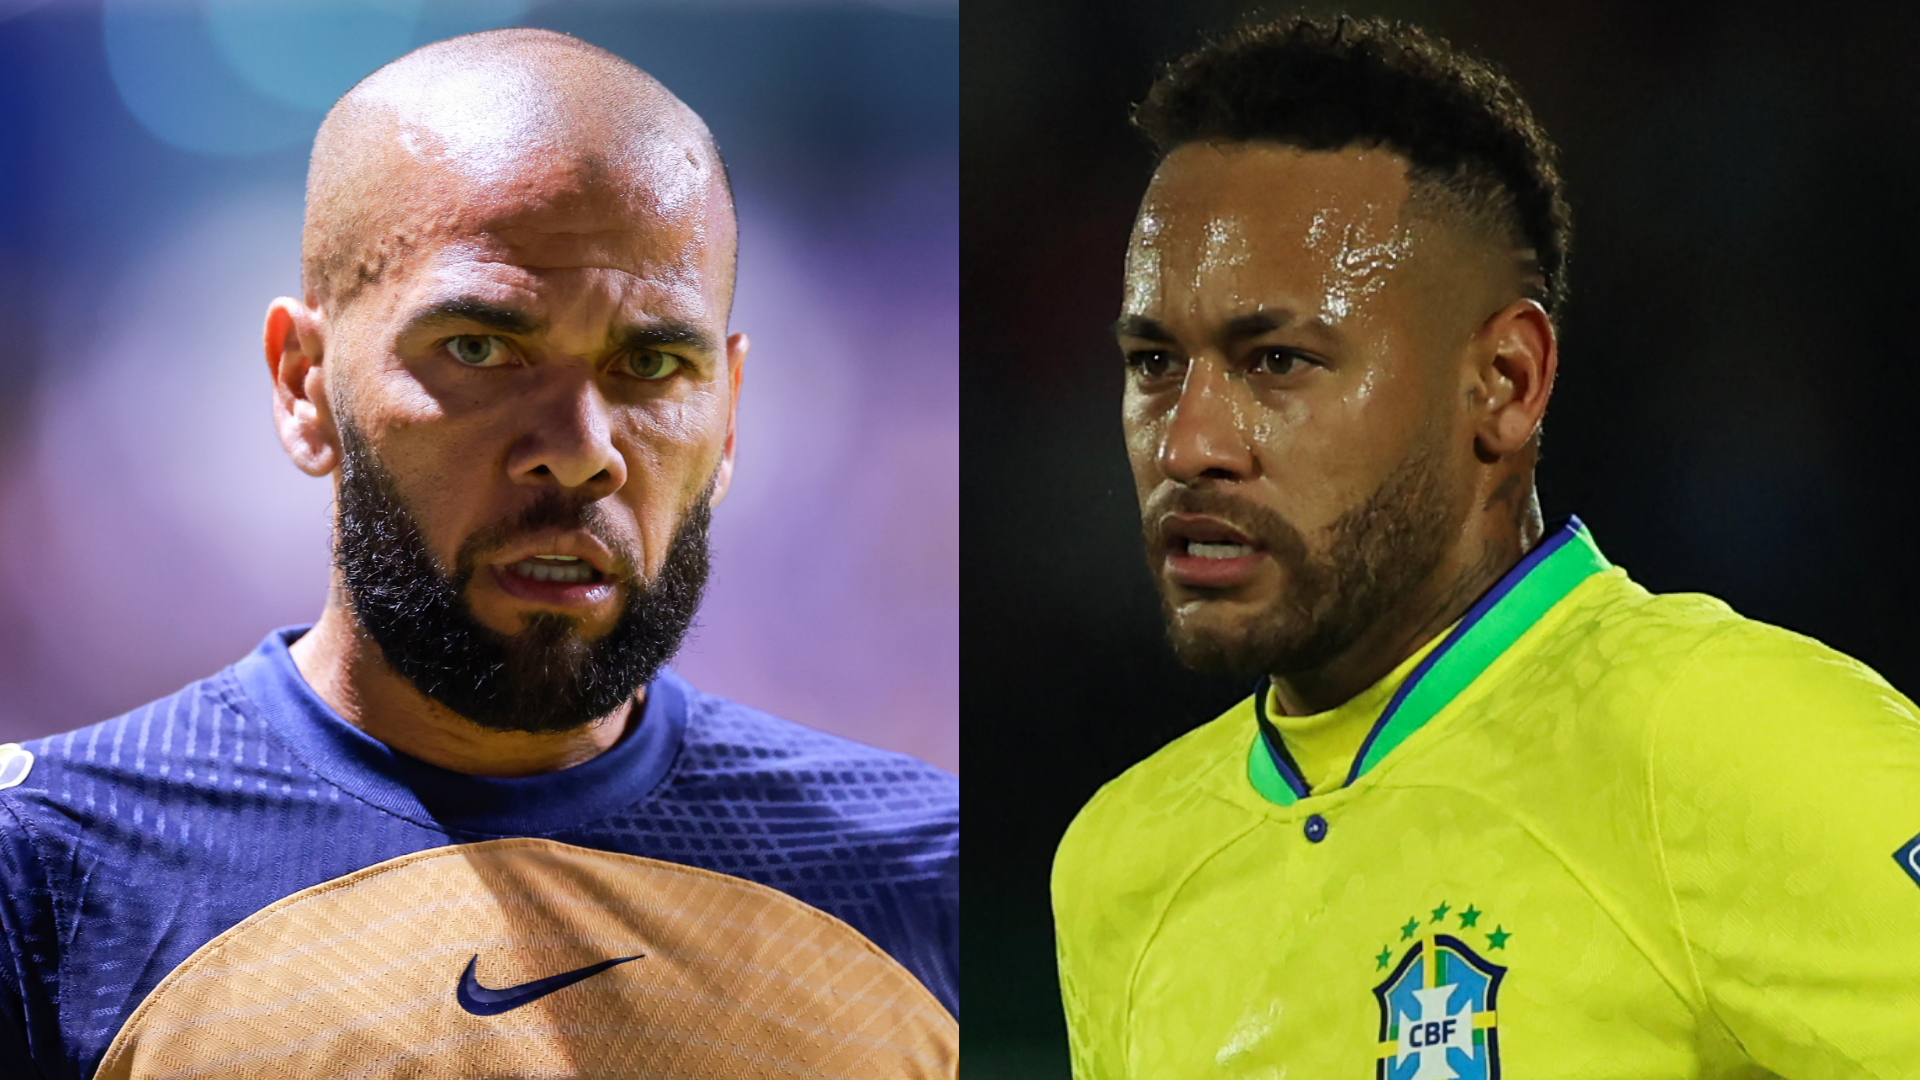 Neymar slammed for ‘absurd’ role in Dani Alves sexual assault case - after allegedly giving ex-Brazil team-mate €150k - with four-and-a-half year sentence criticised as ‘soft’